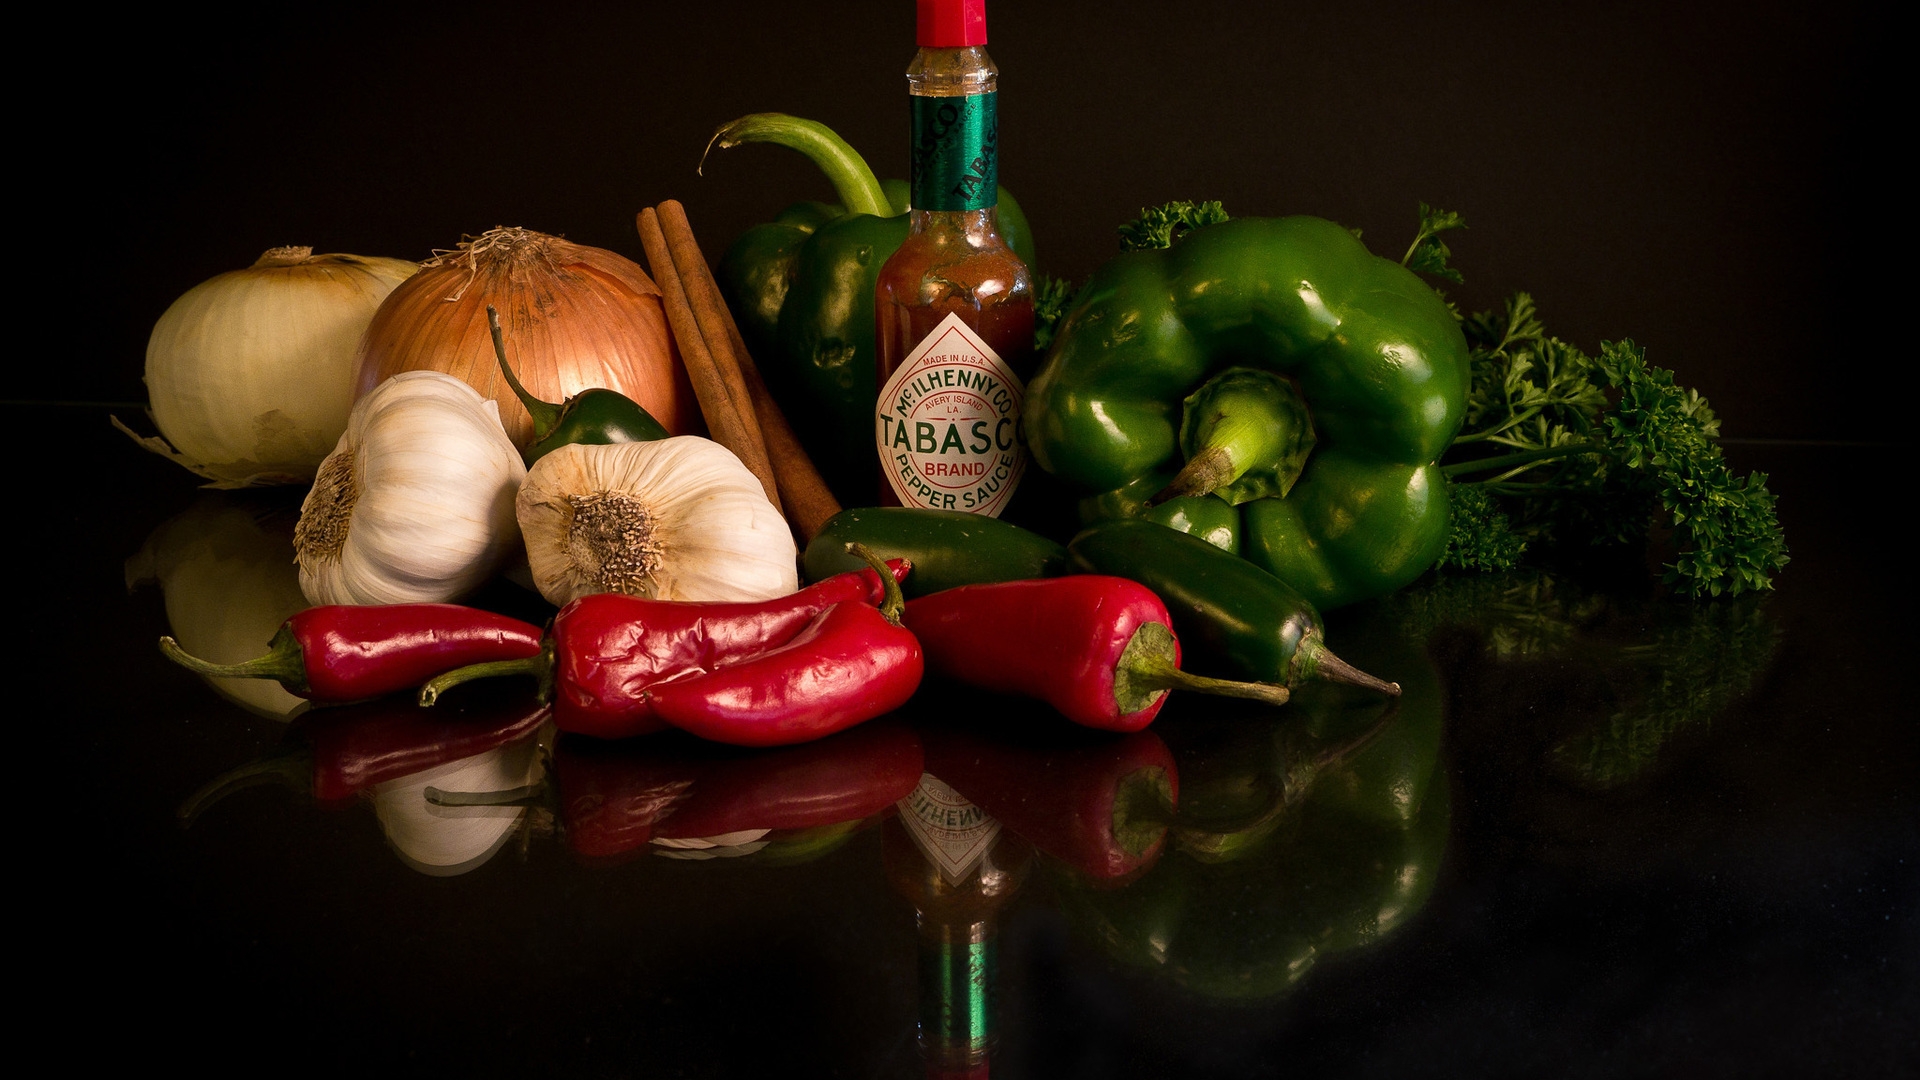 Cool Vegetables and Sauce for 1920 x 1080 HDTV 1080p resolution